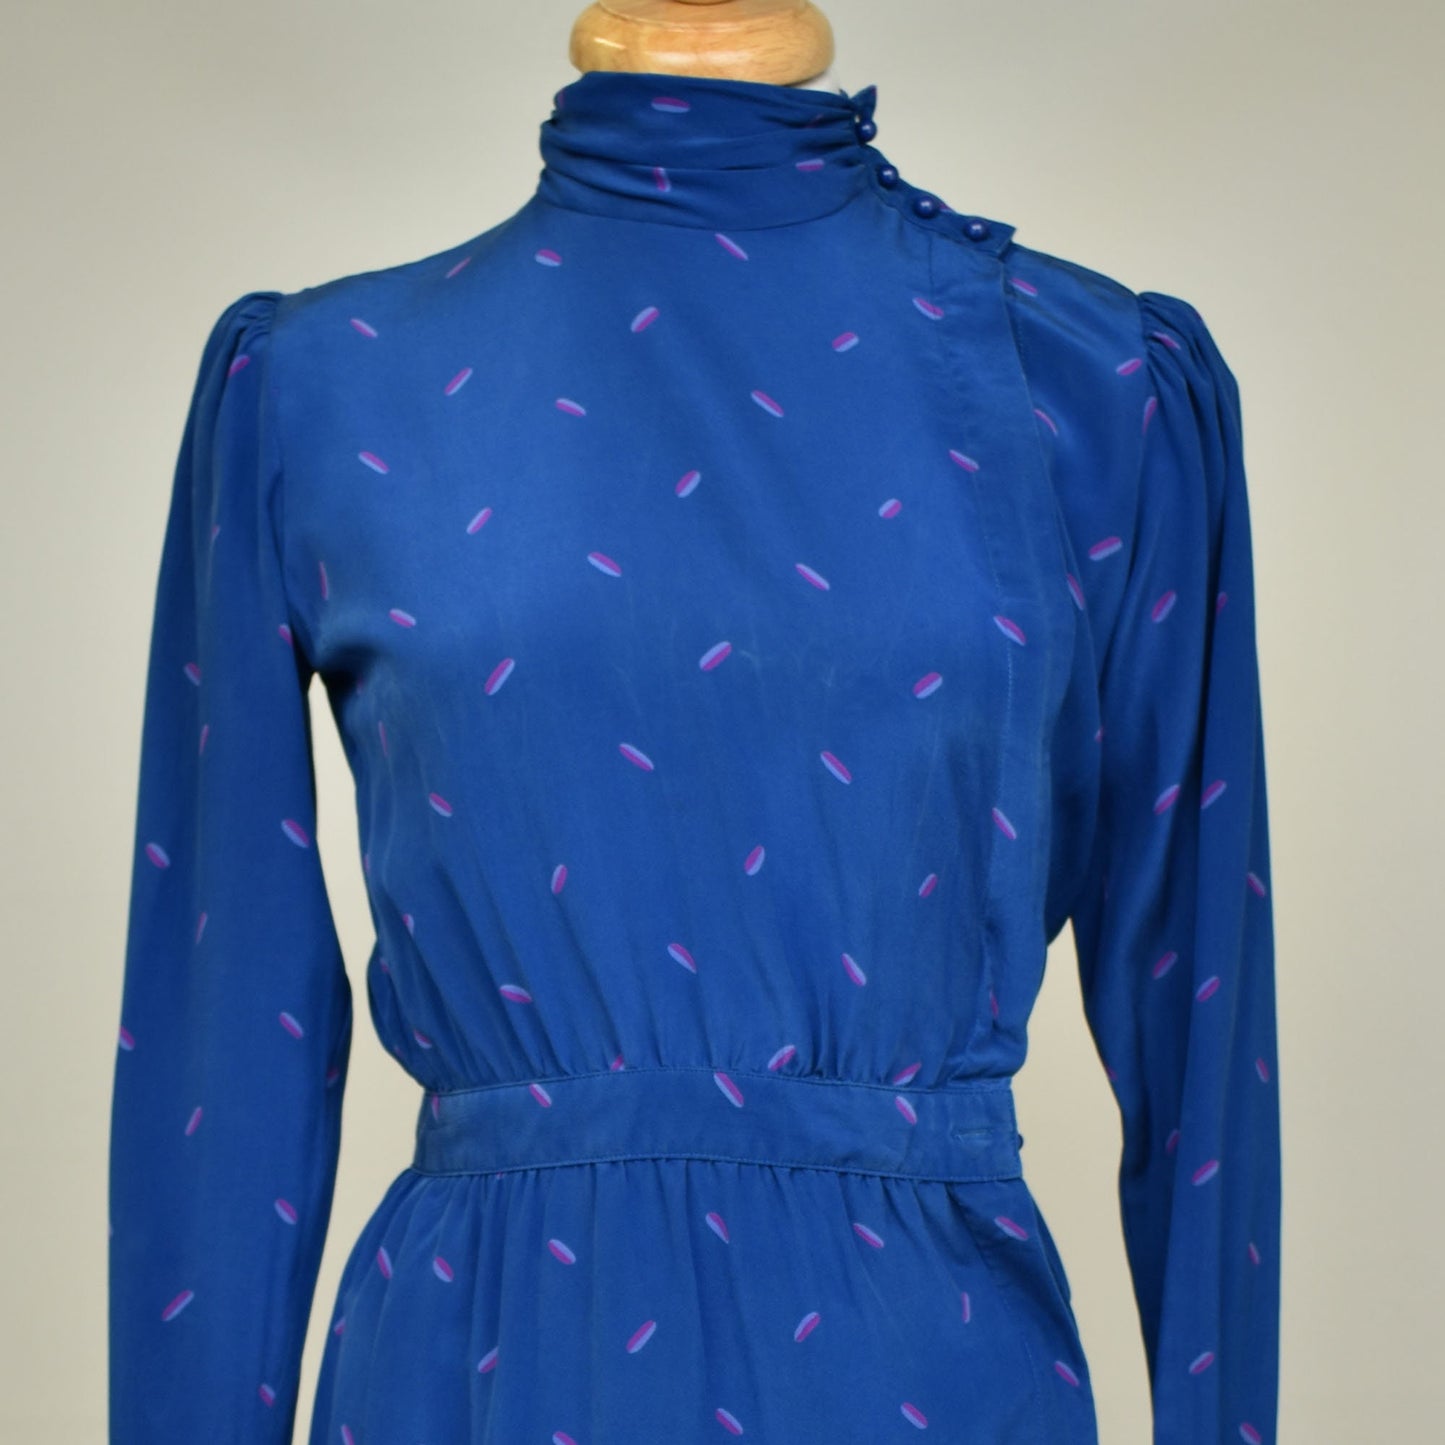 Vintage 80s Silk Secretary Dress in Vivid Blue Silk with Abstract Pink Pill Print by Maggie London Petites - Size 6 Petite